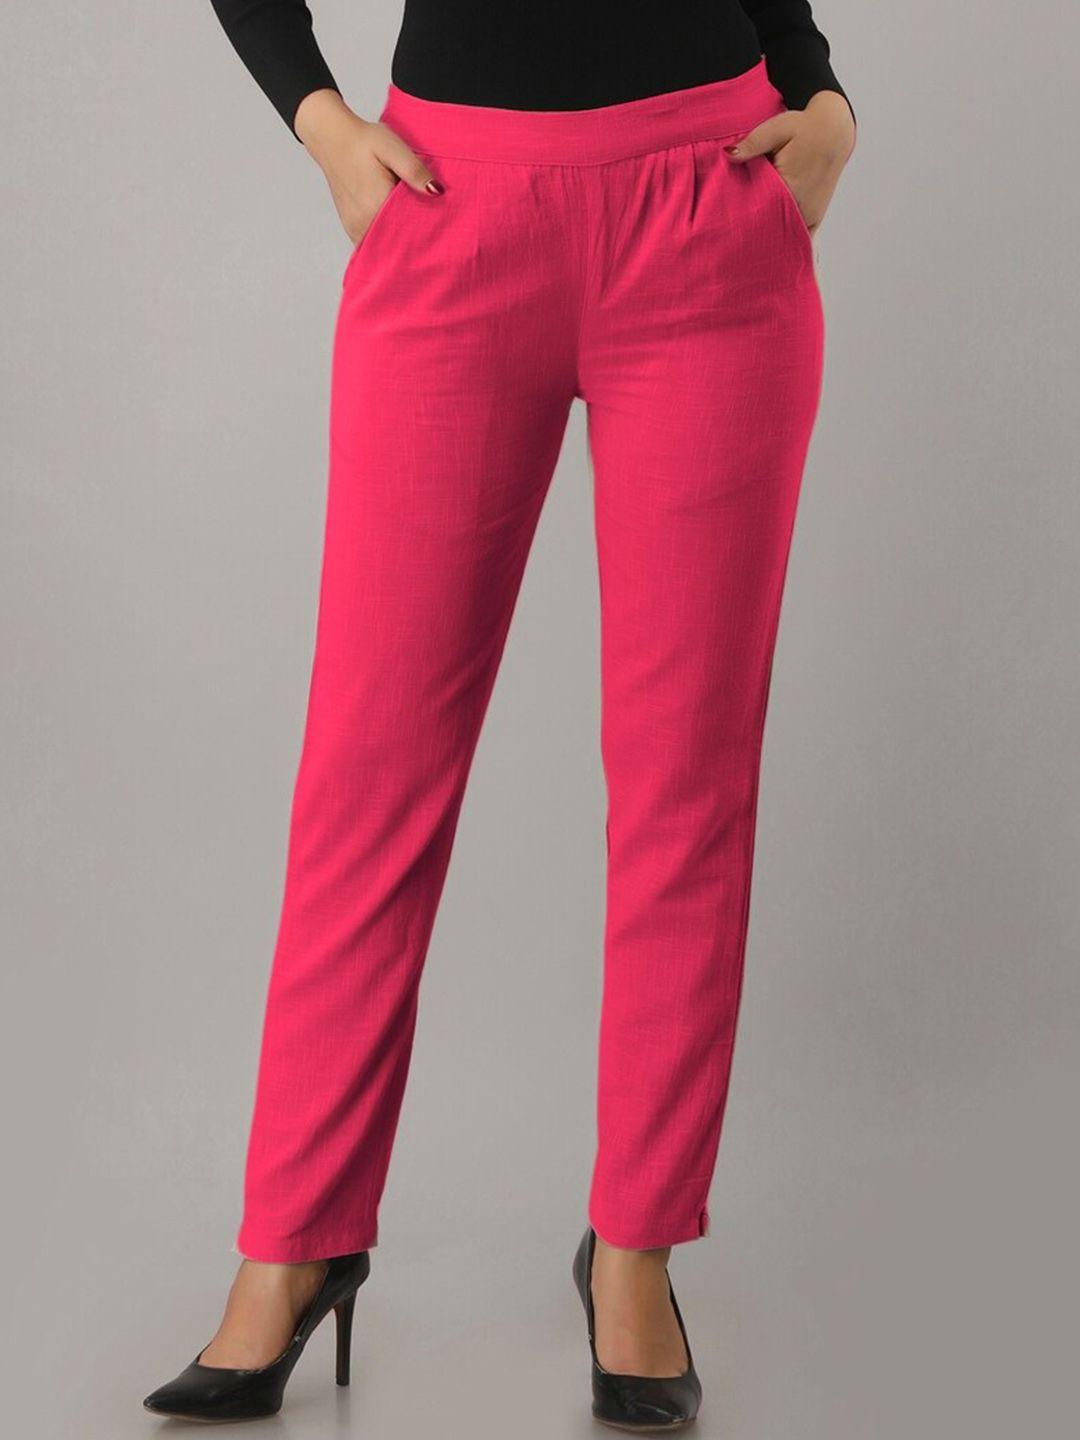 here&now-women-relaxed-mid-rise-cotton-plain-formal-trousers-trousers